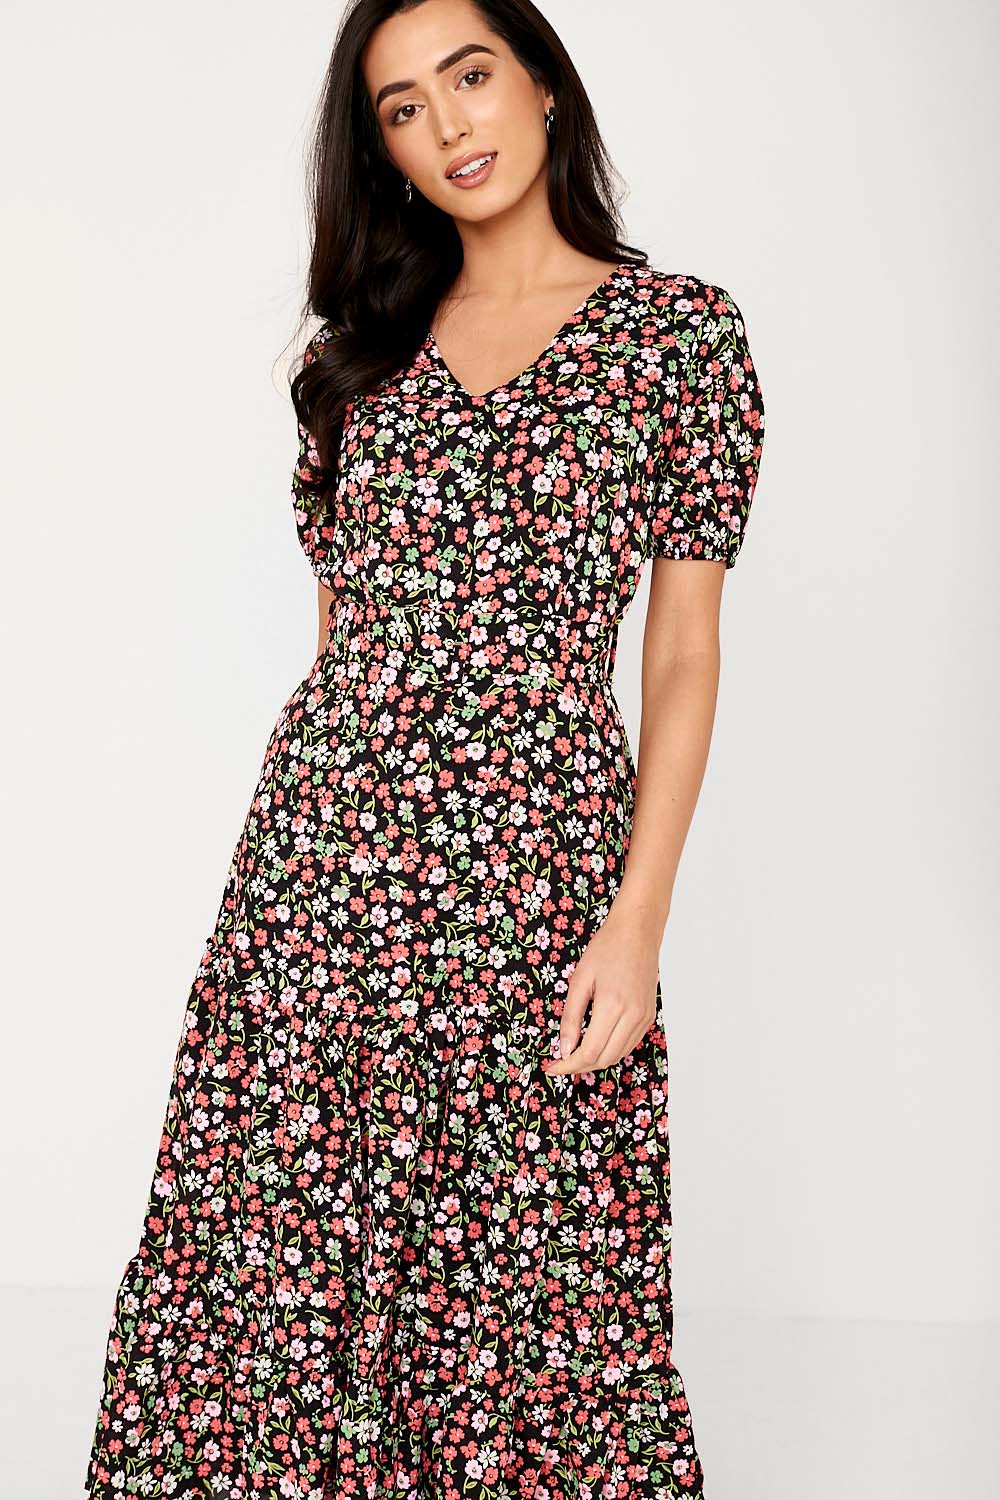 Marc Angelo Abbie Puff Sleeve Belted Midi Dress in Black Floral ...